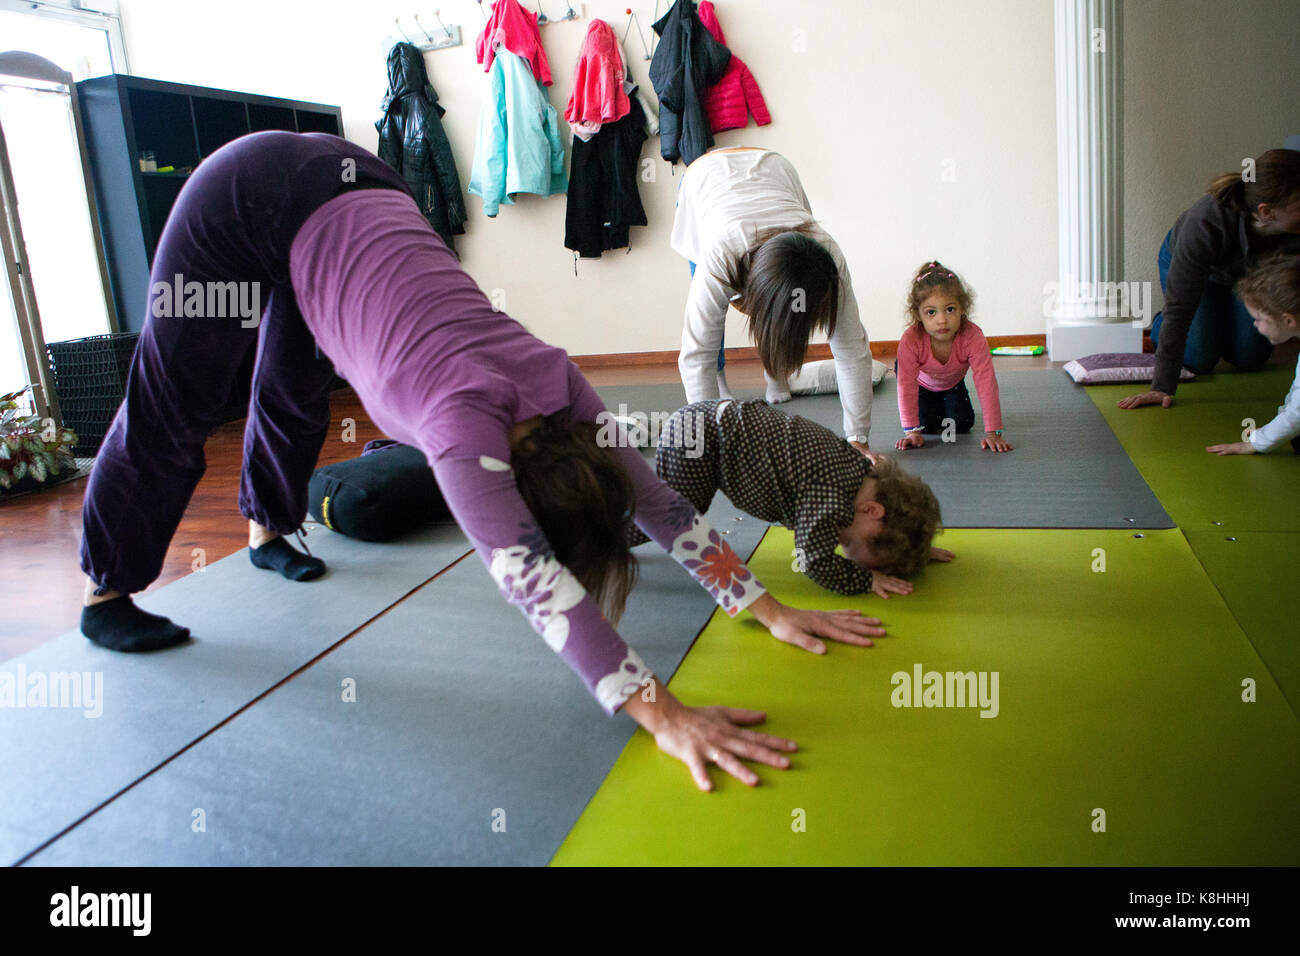 PARENT AND CHILD PRACTICING YOGA Stock Photo